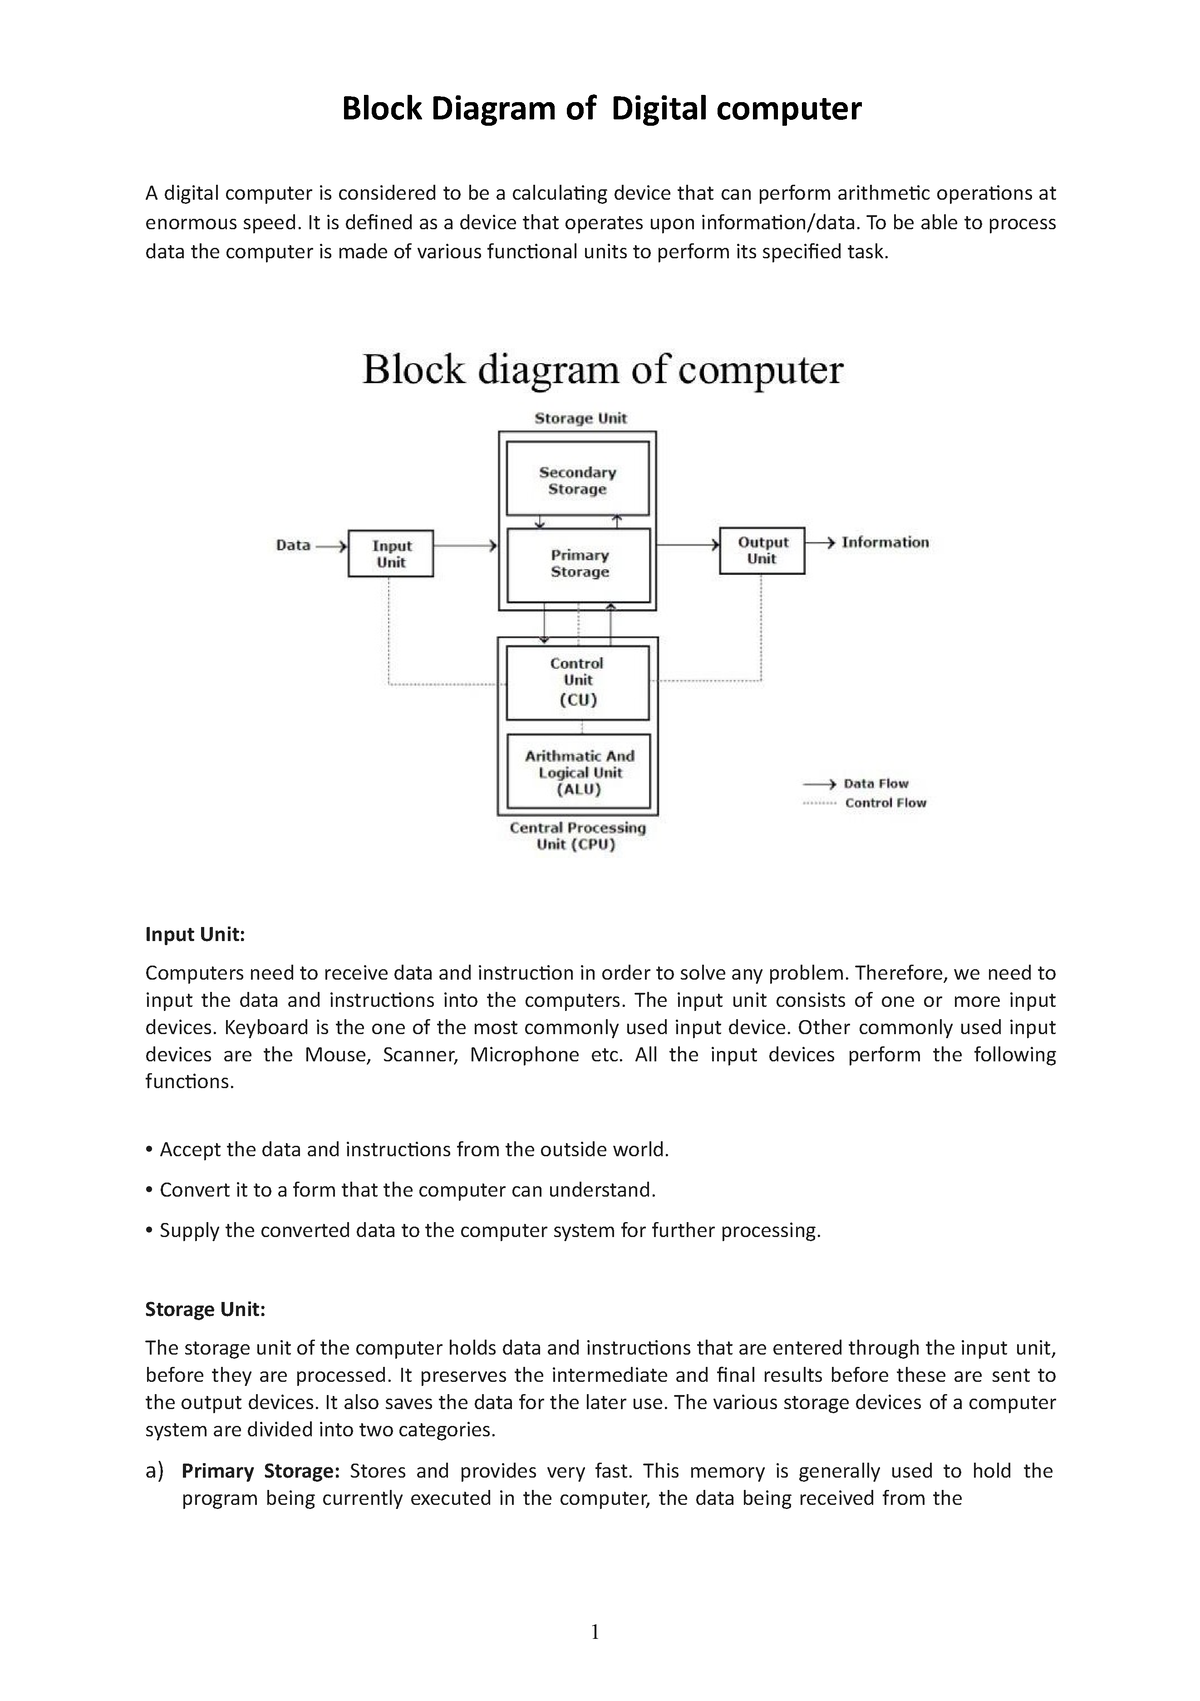 using a block diagram explain how data is processed into